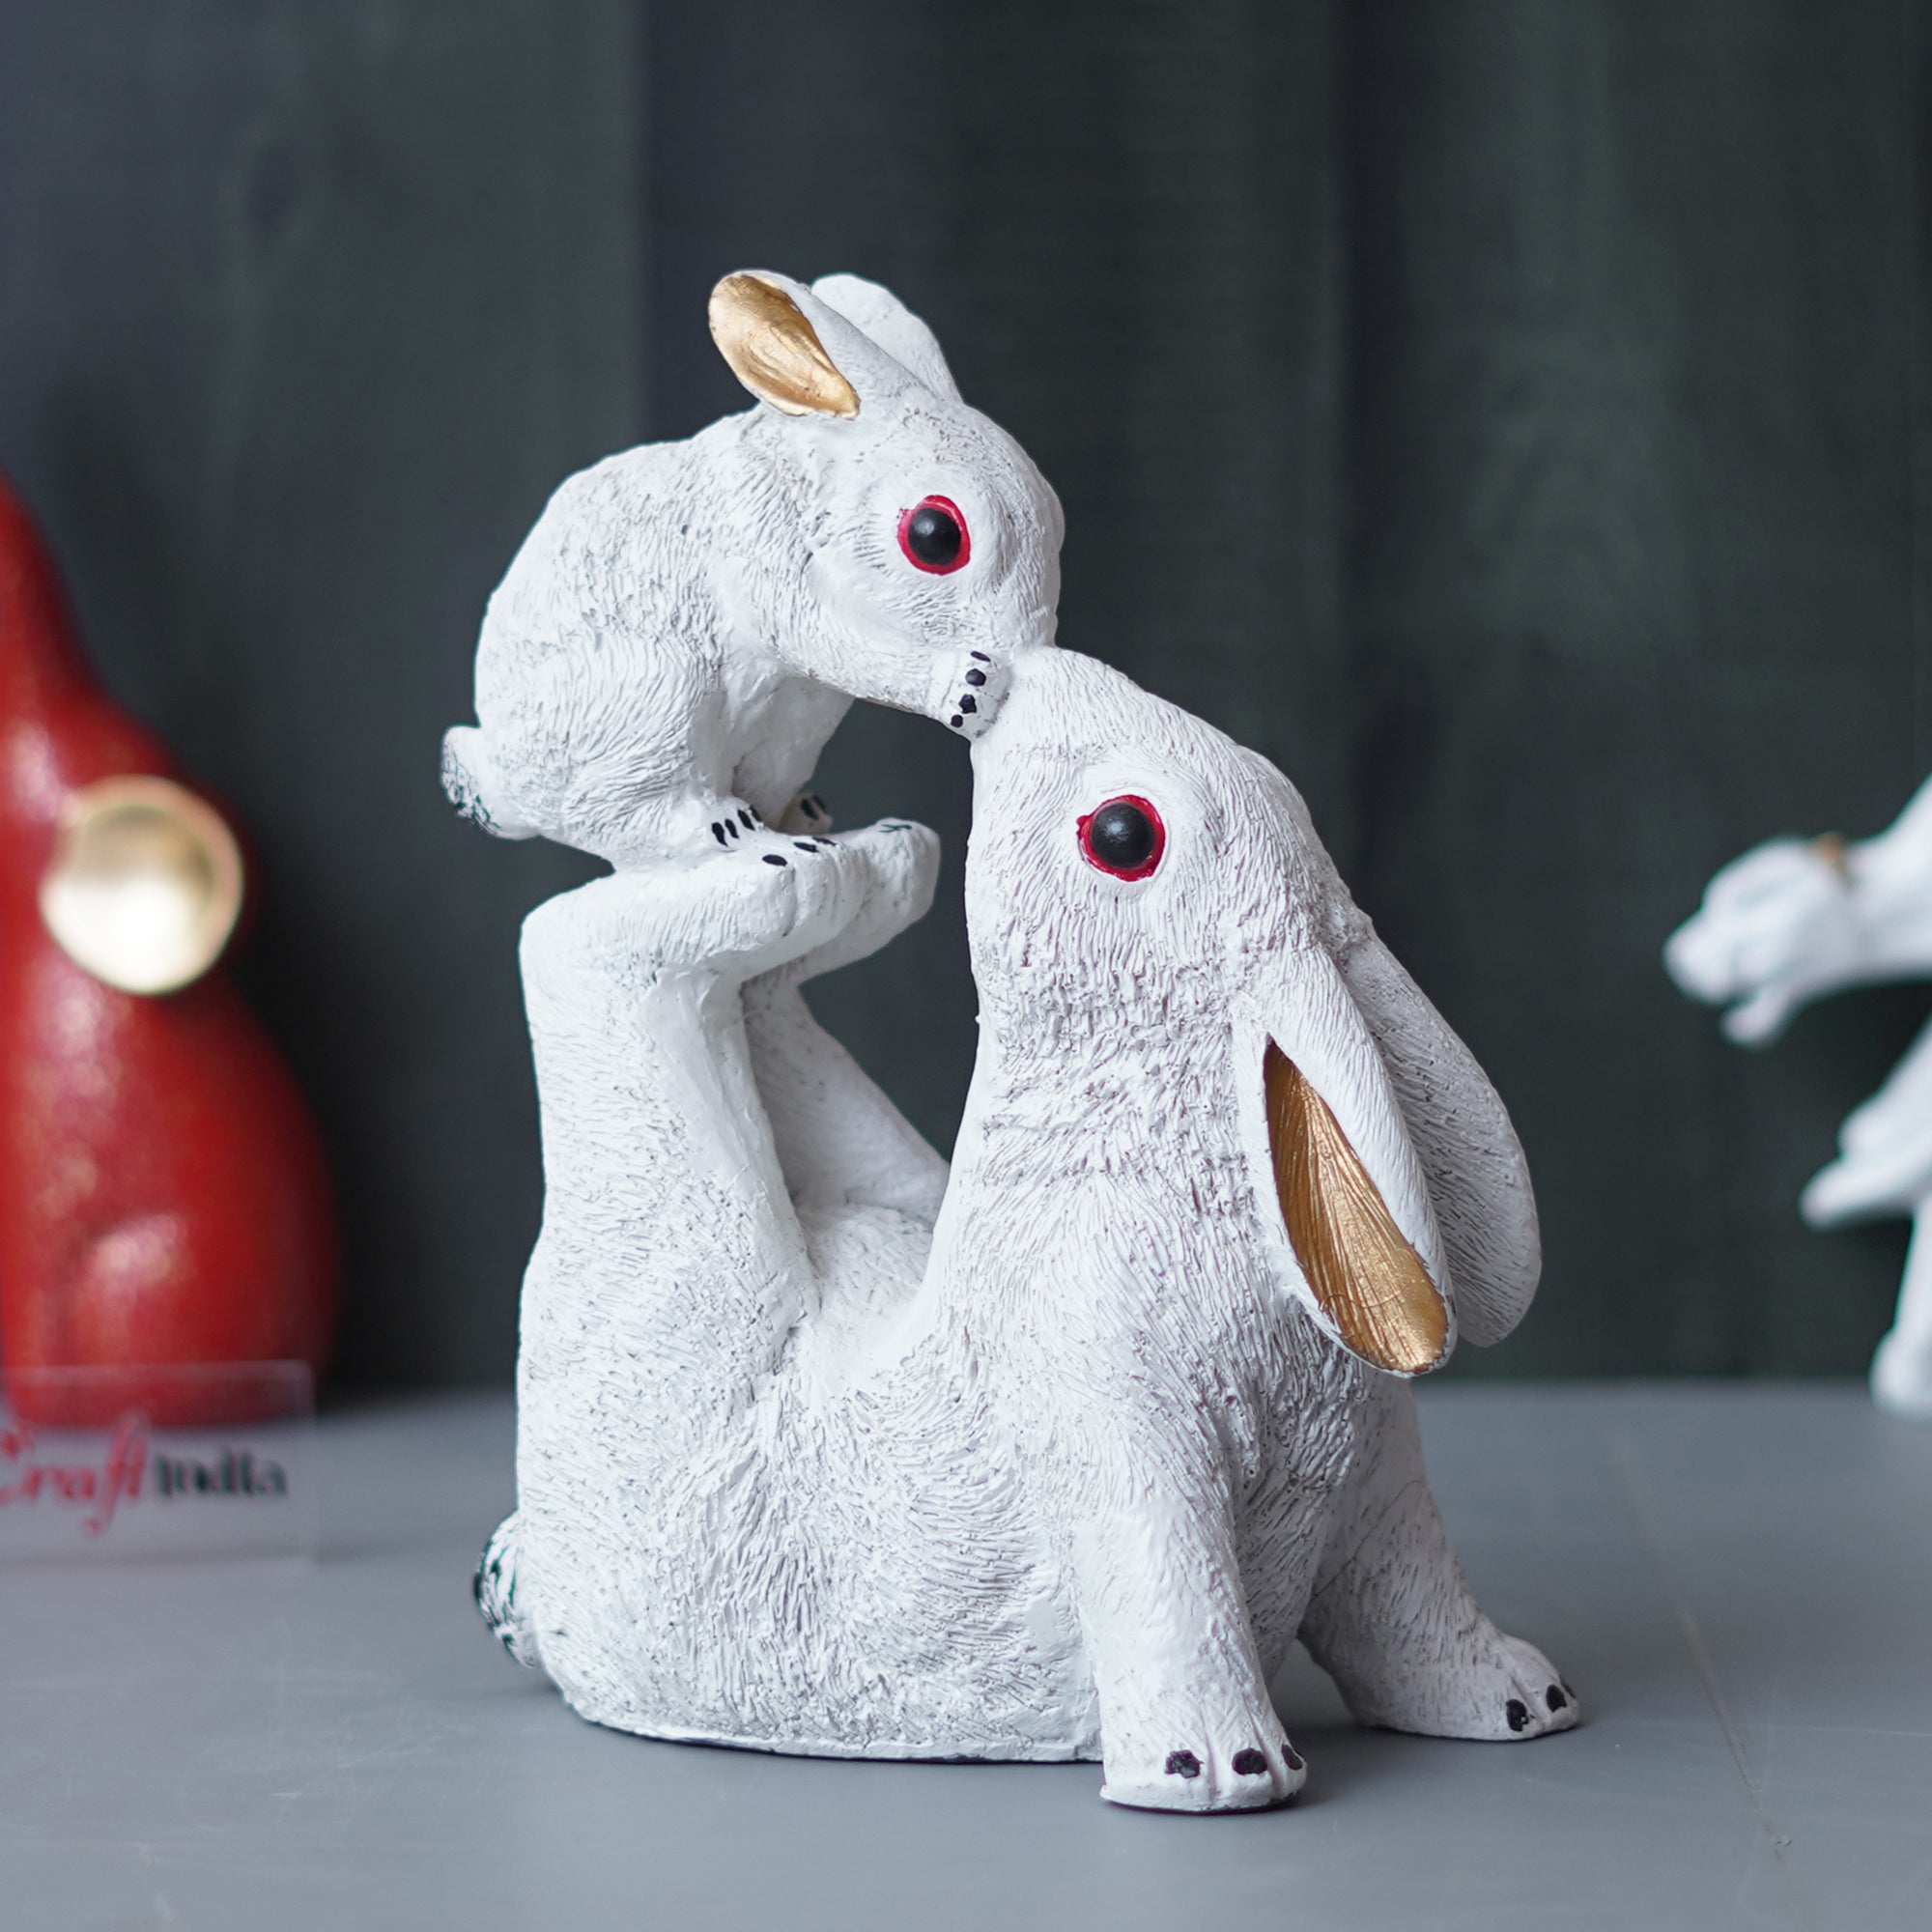 Gold and White Rabbit Statue with Bunny Animal Figurines Decorative Showpiece for Home Decor 5